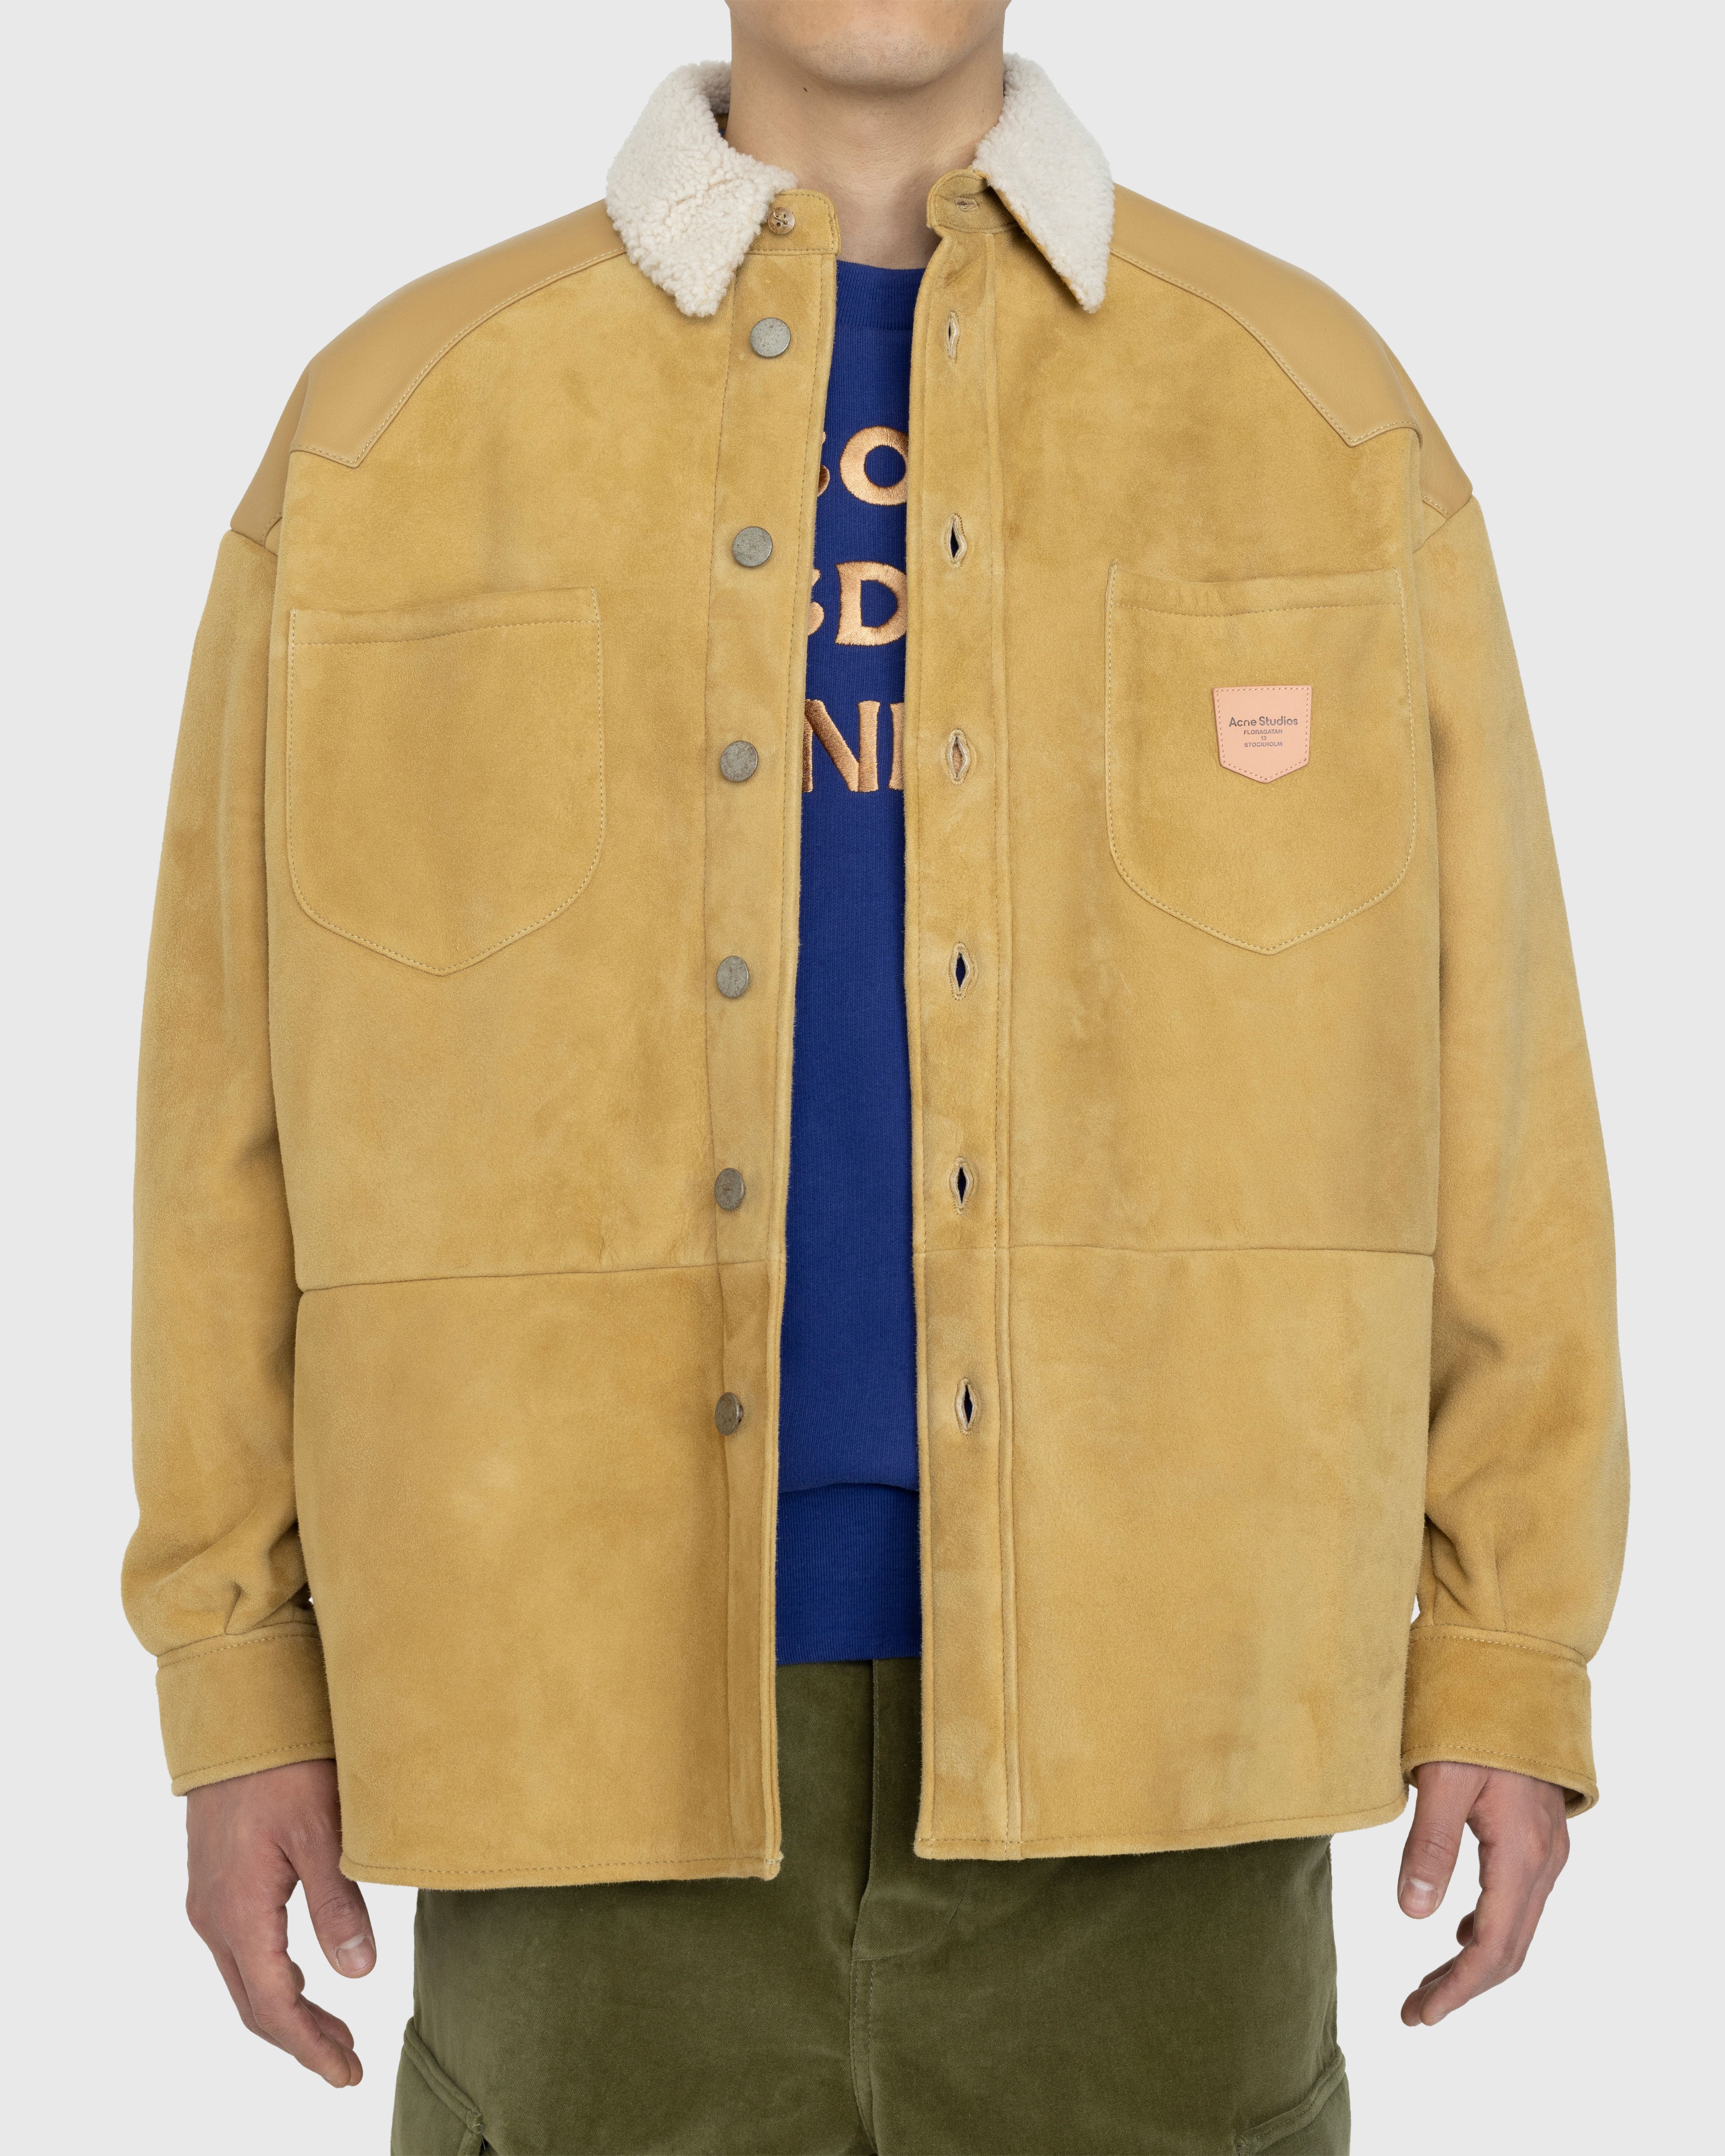 Acne Studios - Suede Leather Shearling Overshirt Straw Yellow - Clothing - Yellow - Image 2